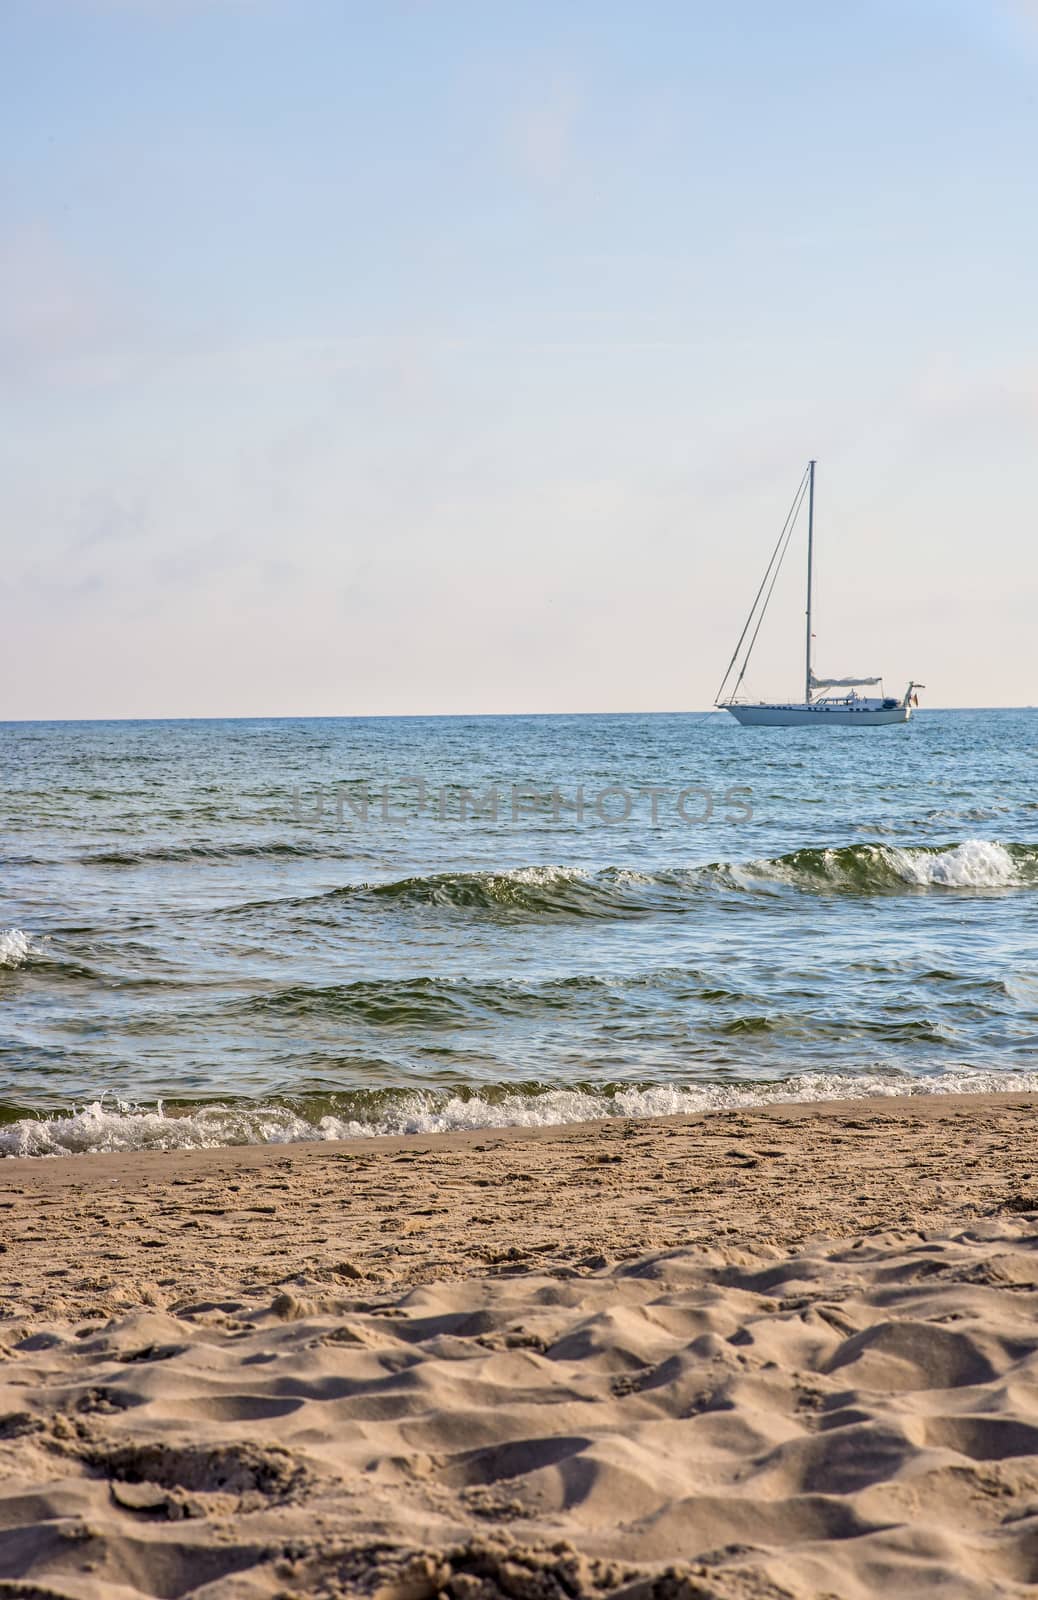 Sailboat anchored on a beach in the Baltic Sea